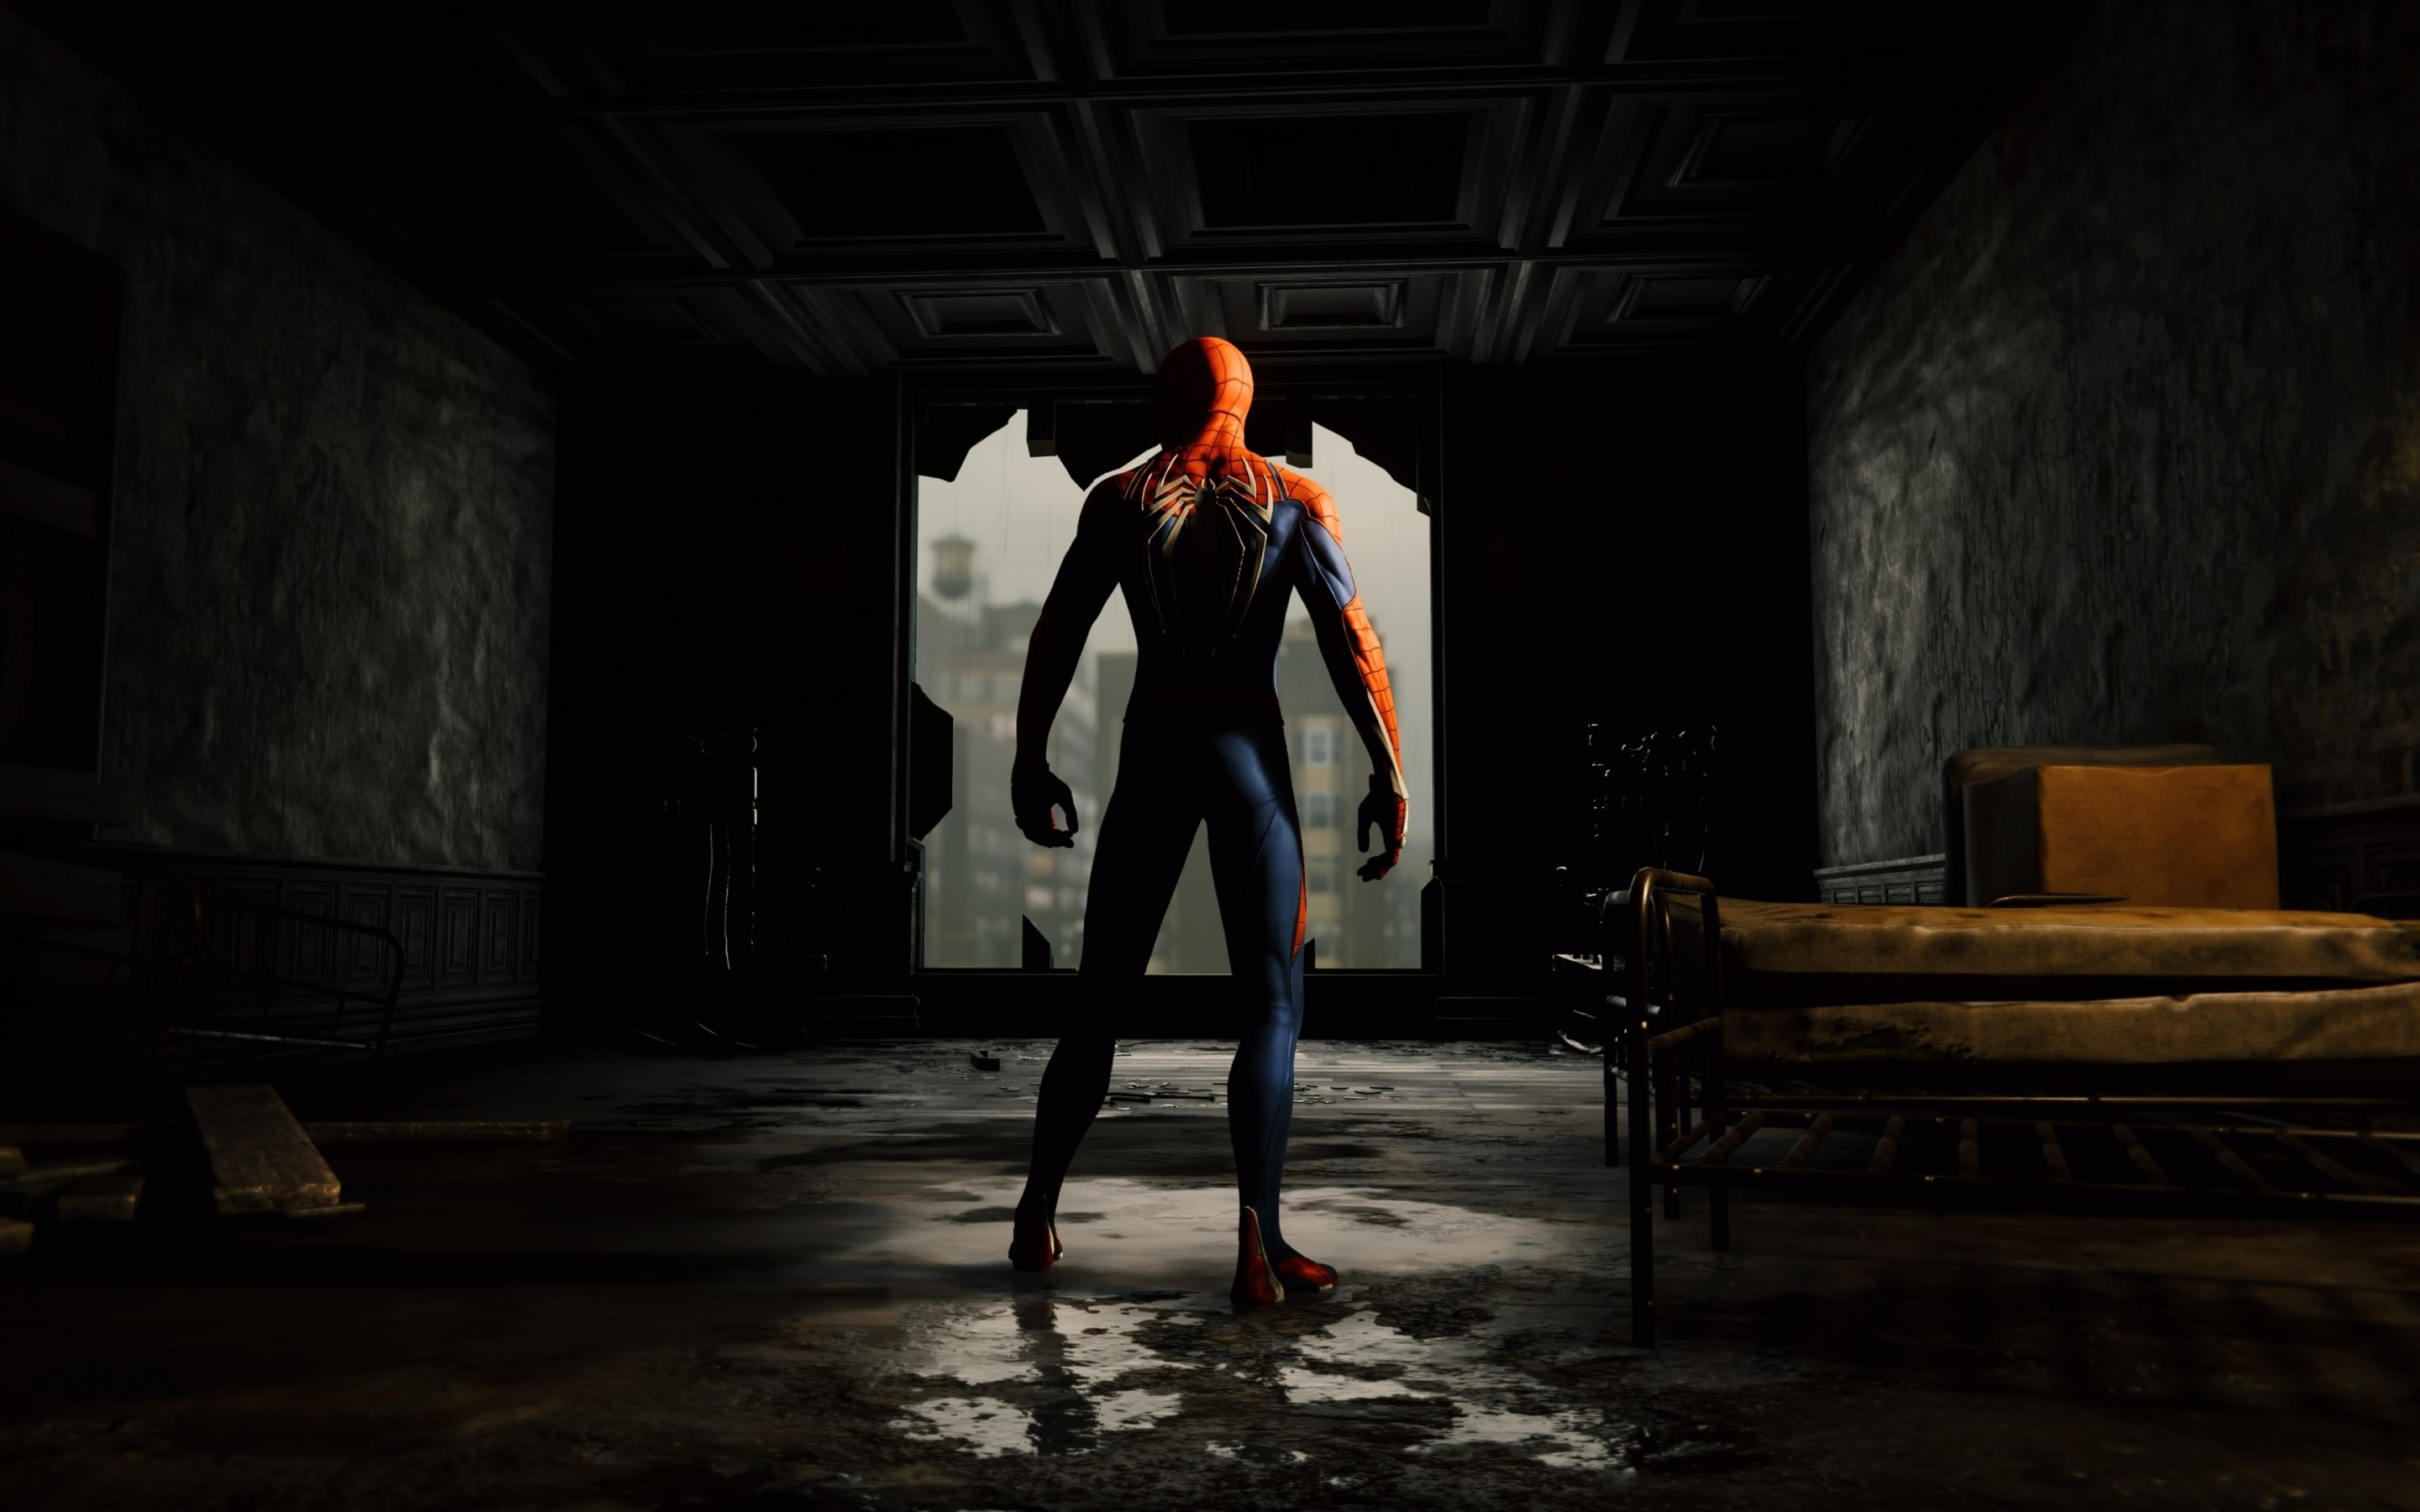 Ps4 game, Spiderman, back-pose, 2880x1800 wallpaper